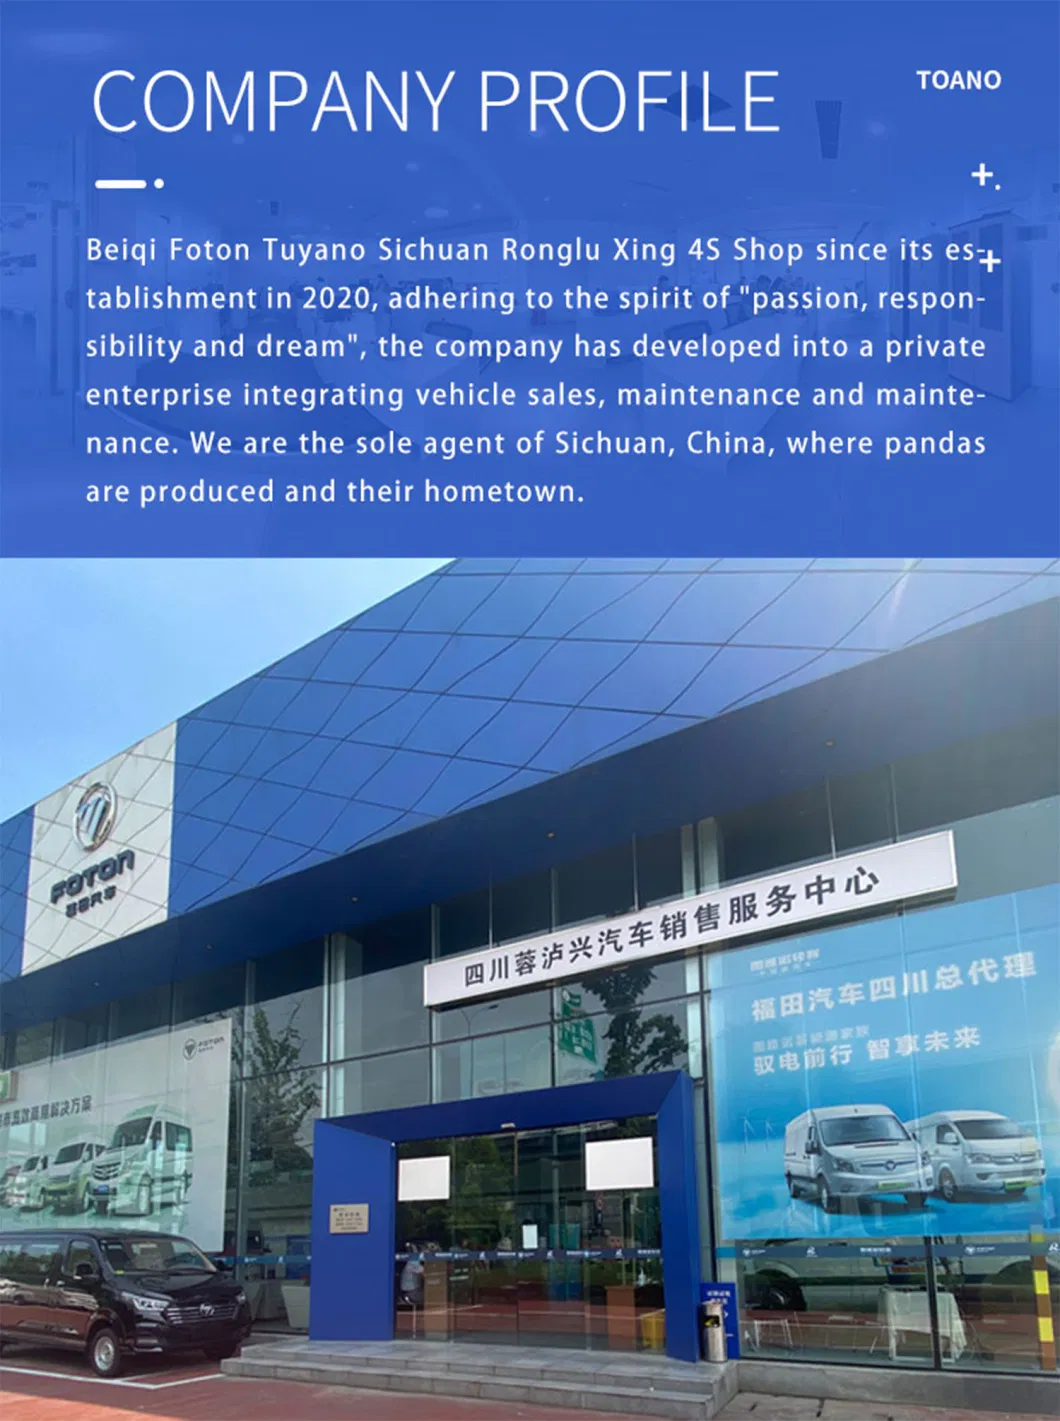 China Factory Tuyano Extended Axle Twin Vans, Minivans, Commercial Vehicles, Food Transport, Cargo Transport Vehicles